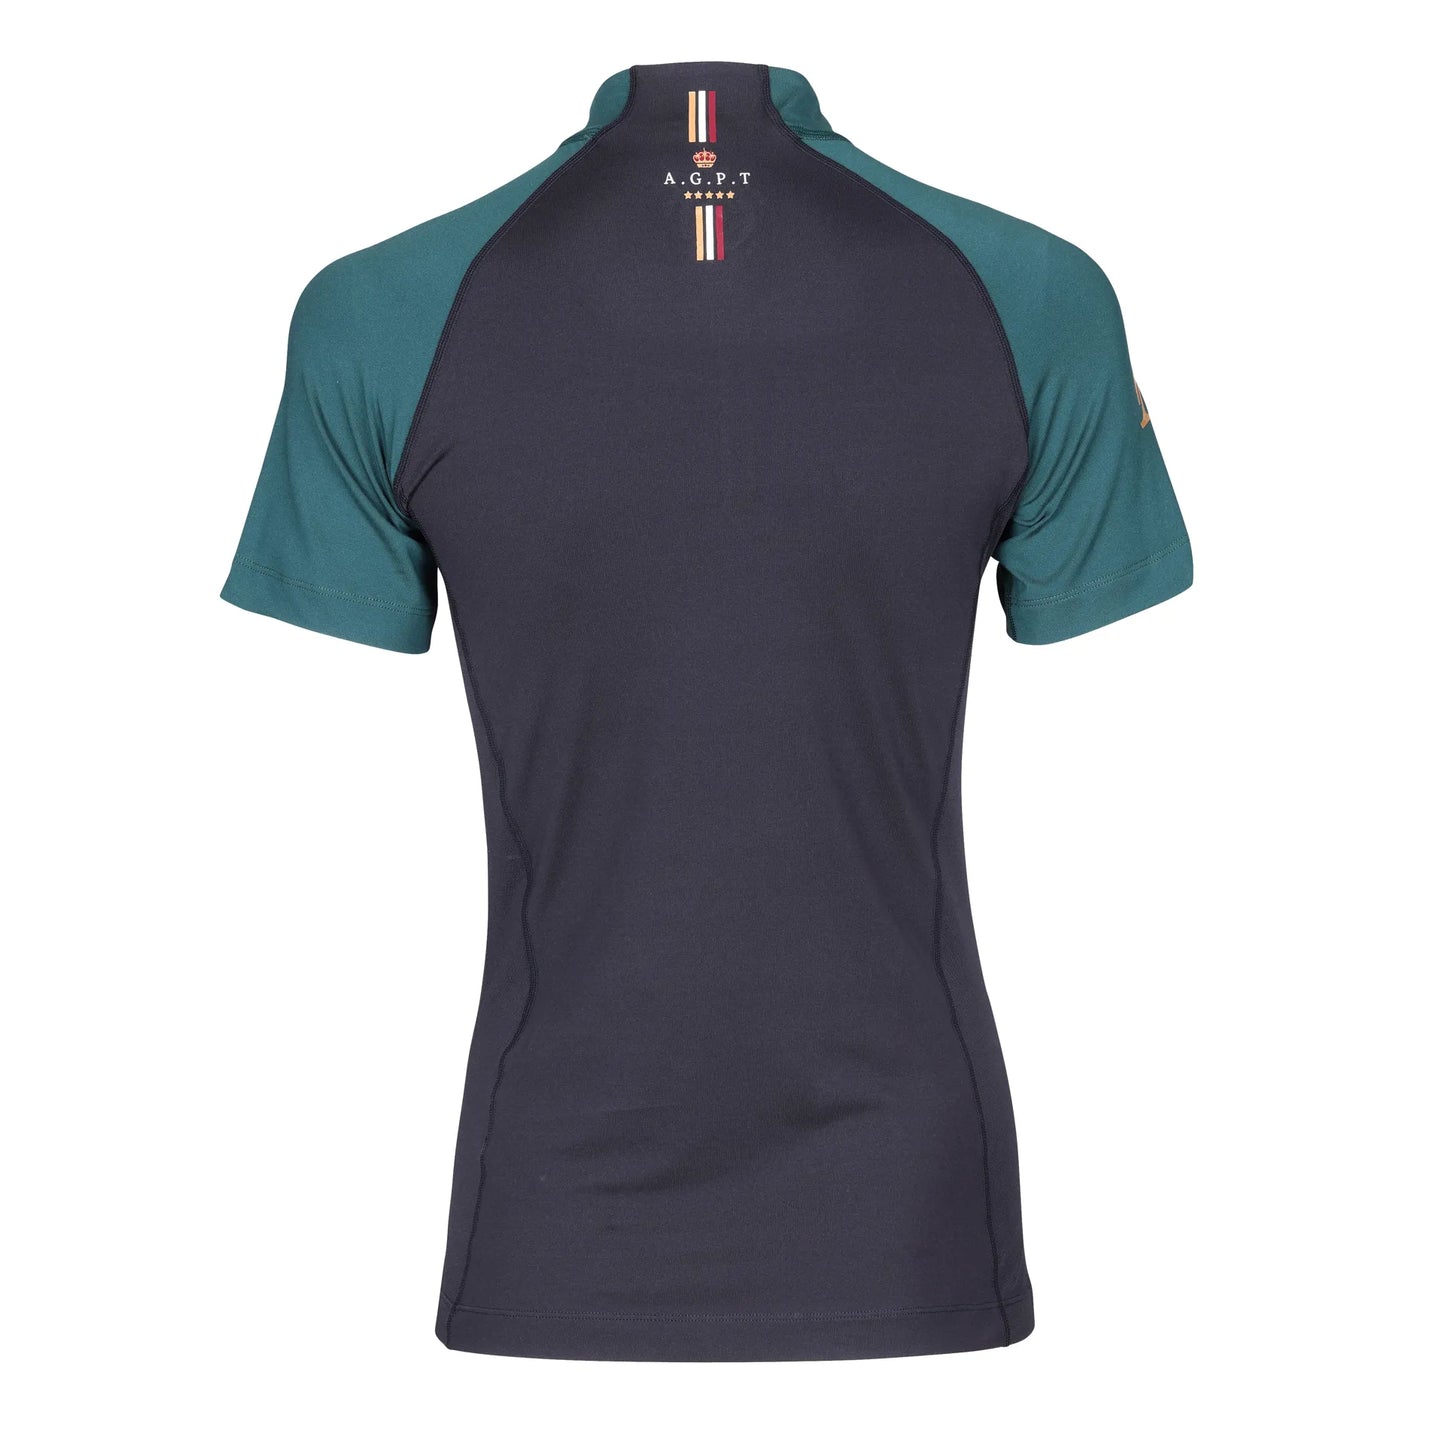 Shires Aubrion Team Short Sleeve Young Rider Base Layer - Black